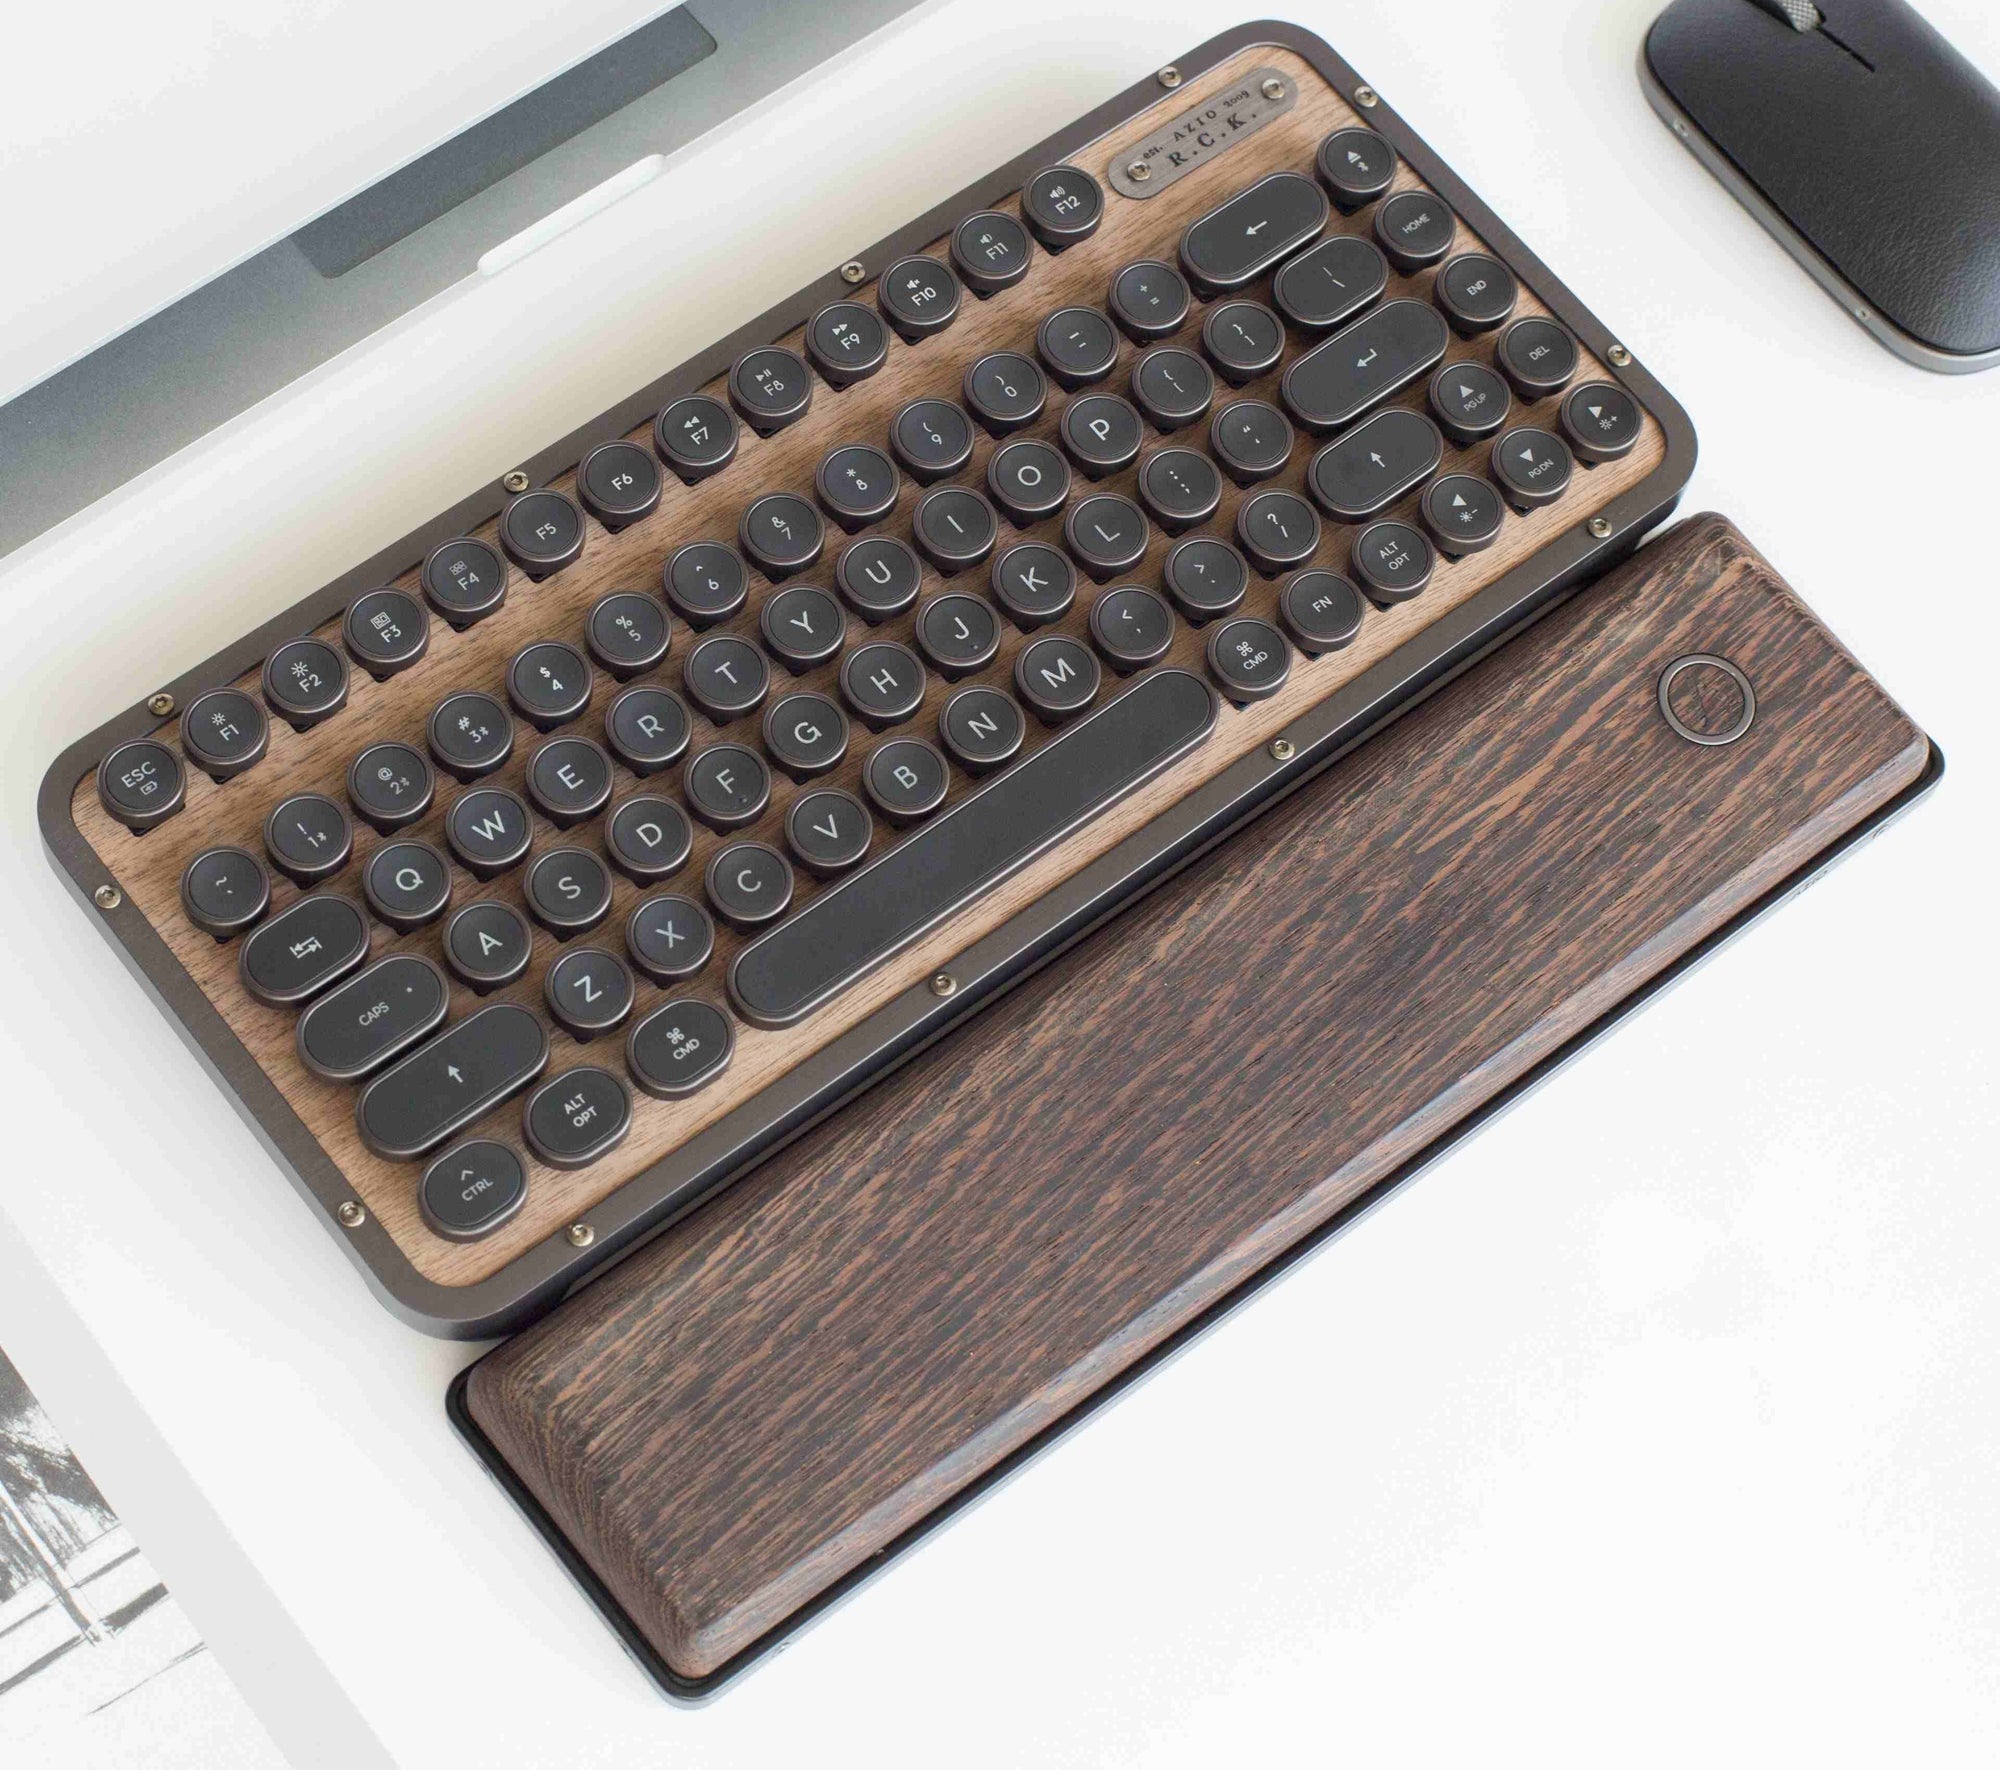 TECHTHELEAD: Azio Mechanical Keyboard is a Stunning Retro-inspired Device